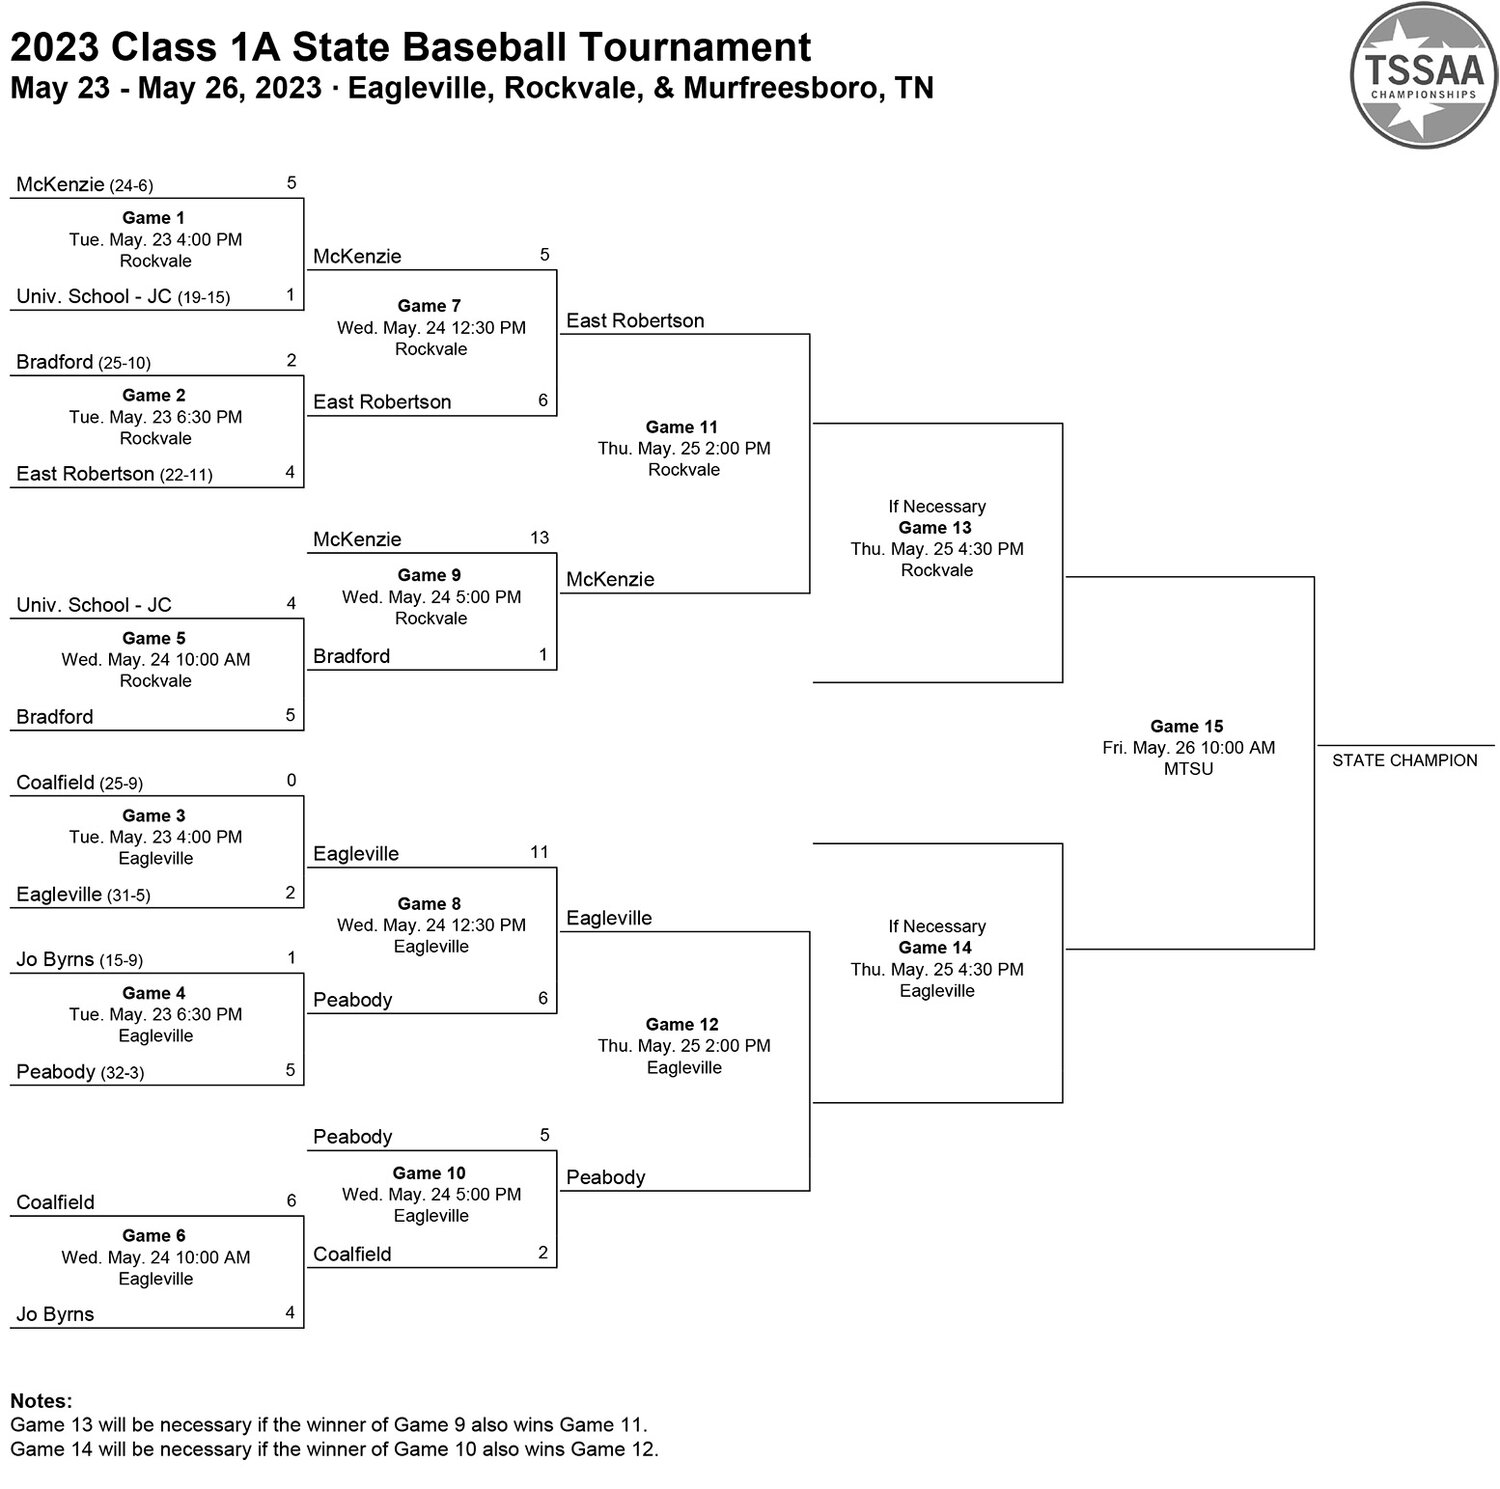 McKenzie Rebels Play East Robertson on Thursday, May 25 at 2 p.m. at Rockvale High School in the quarter-final round of the TSSAA Class 1A baseball tournaments.